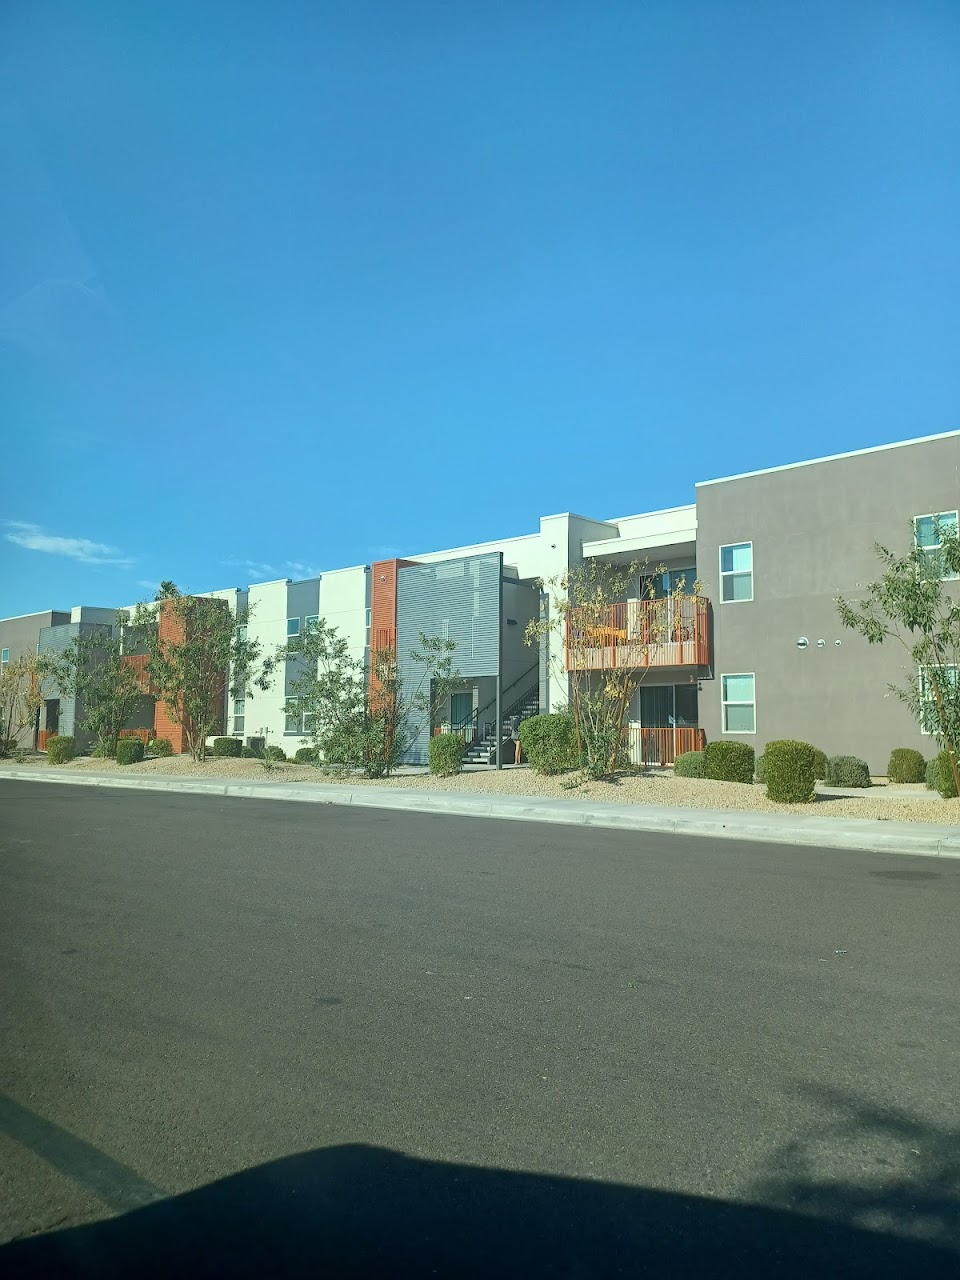 Photo of BETHANY CROSSING. Affordable housing located at 6253 N 69TH AVENUE GLENDALE, AZ 85303